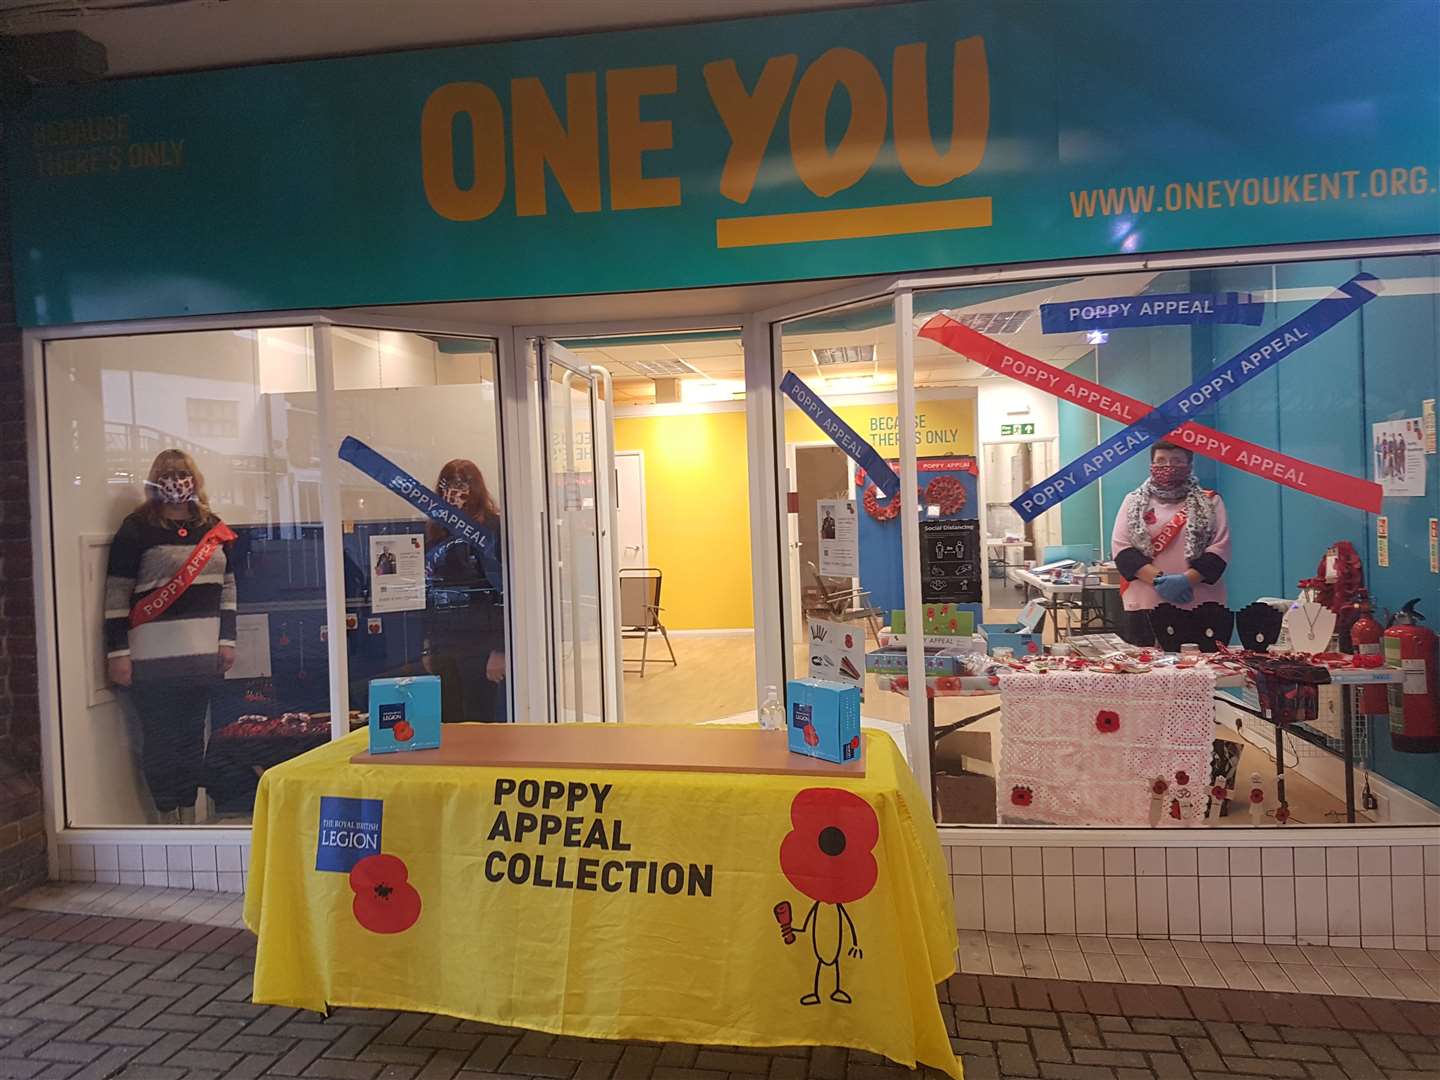 The former One You unit in Park Mall has been taken over by military charity supporters